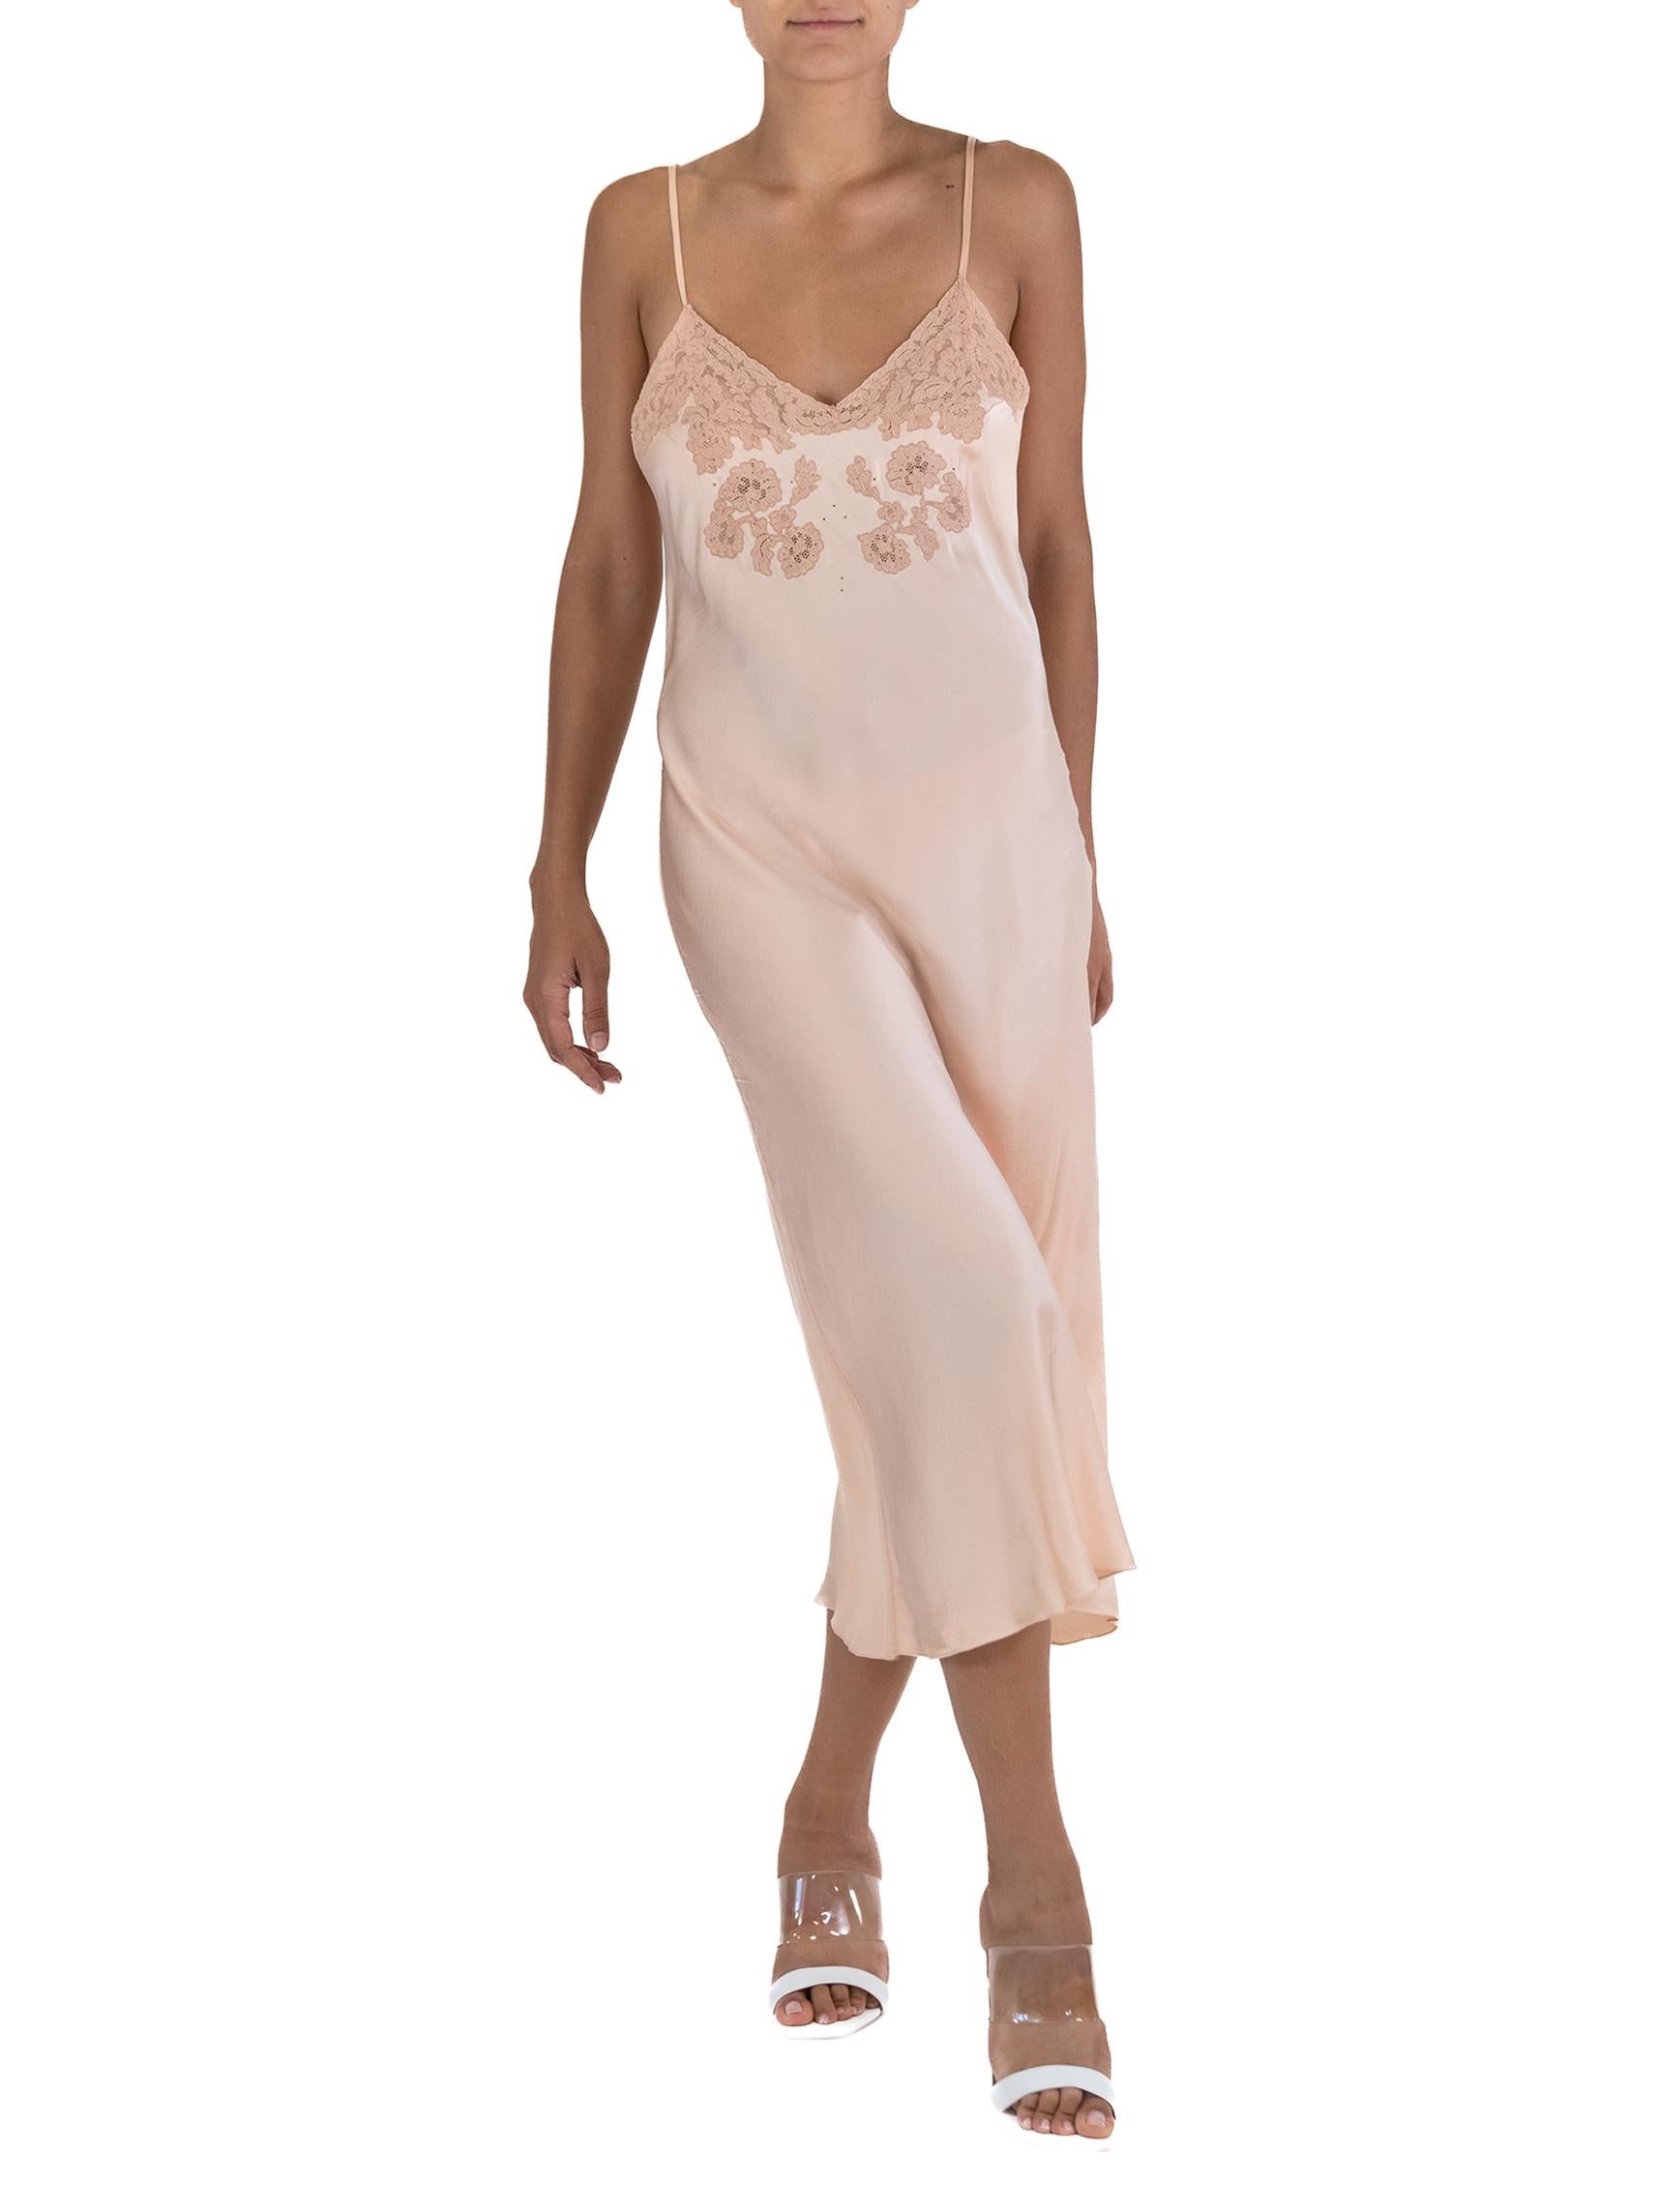 Women's 1940S Bontell Peach Silk Slip All Handmade With Lace Detail For Sale